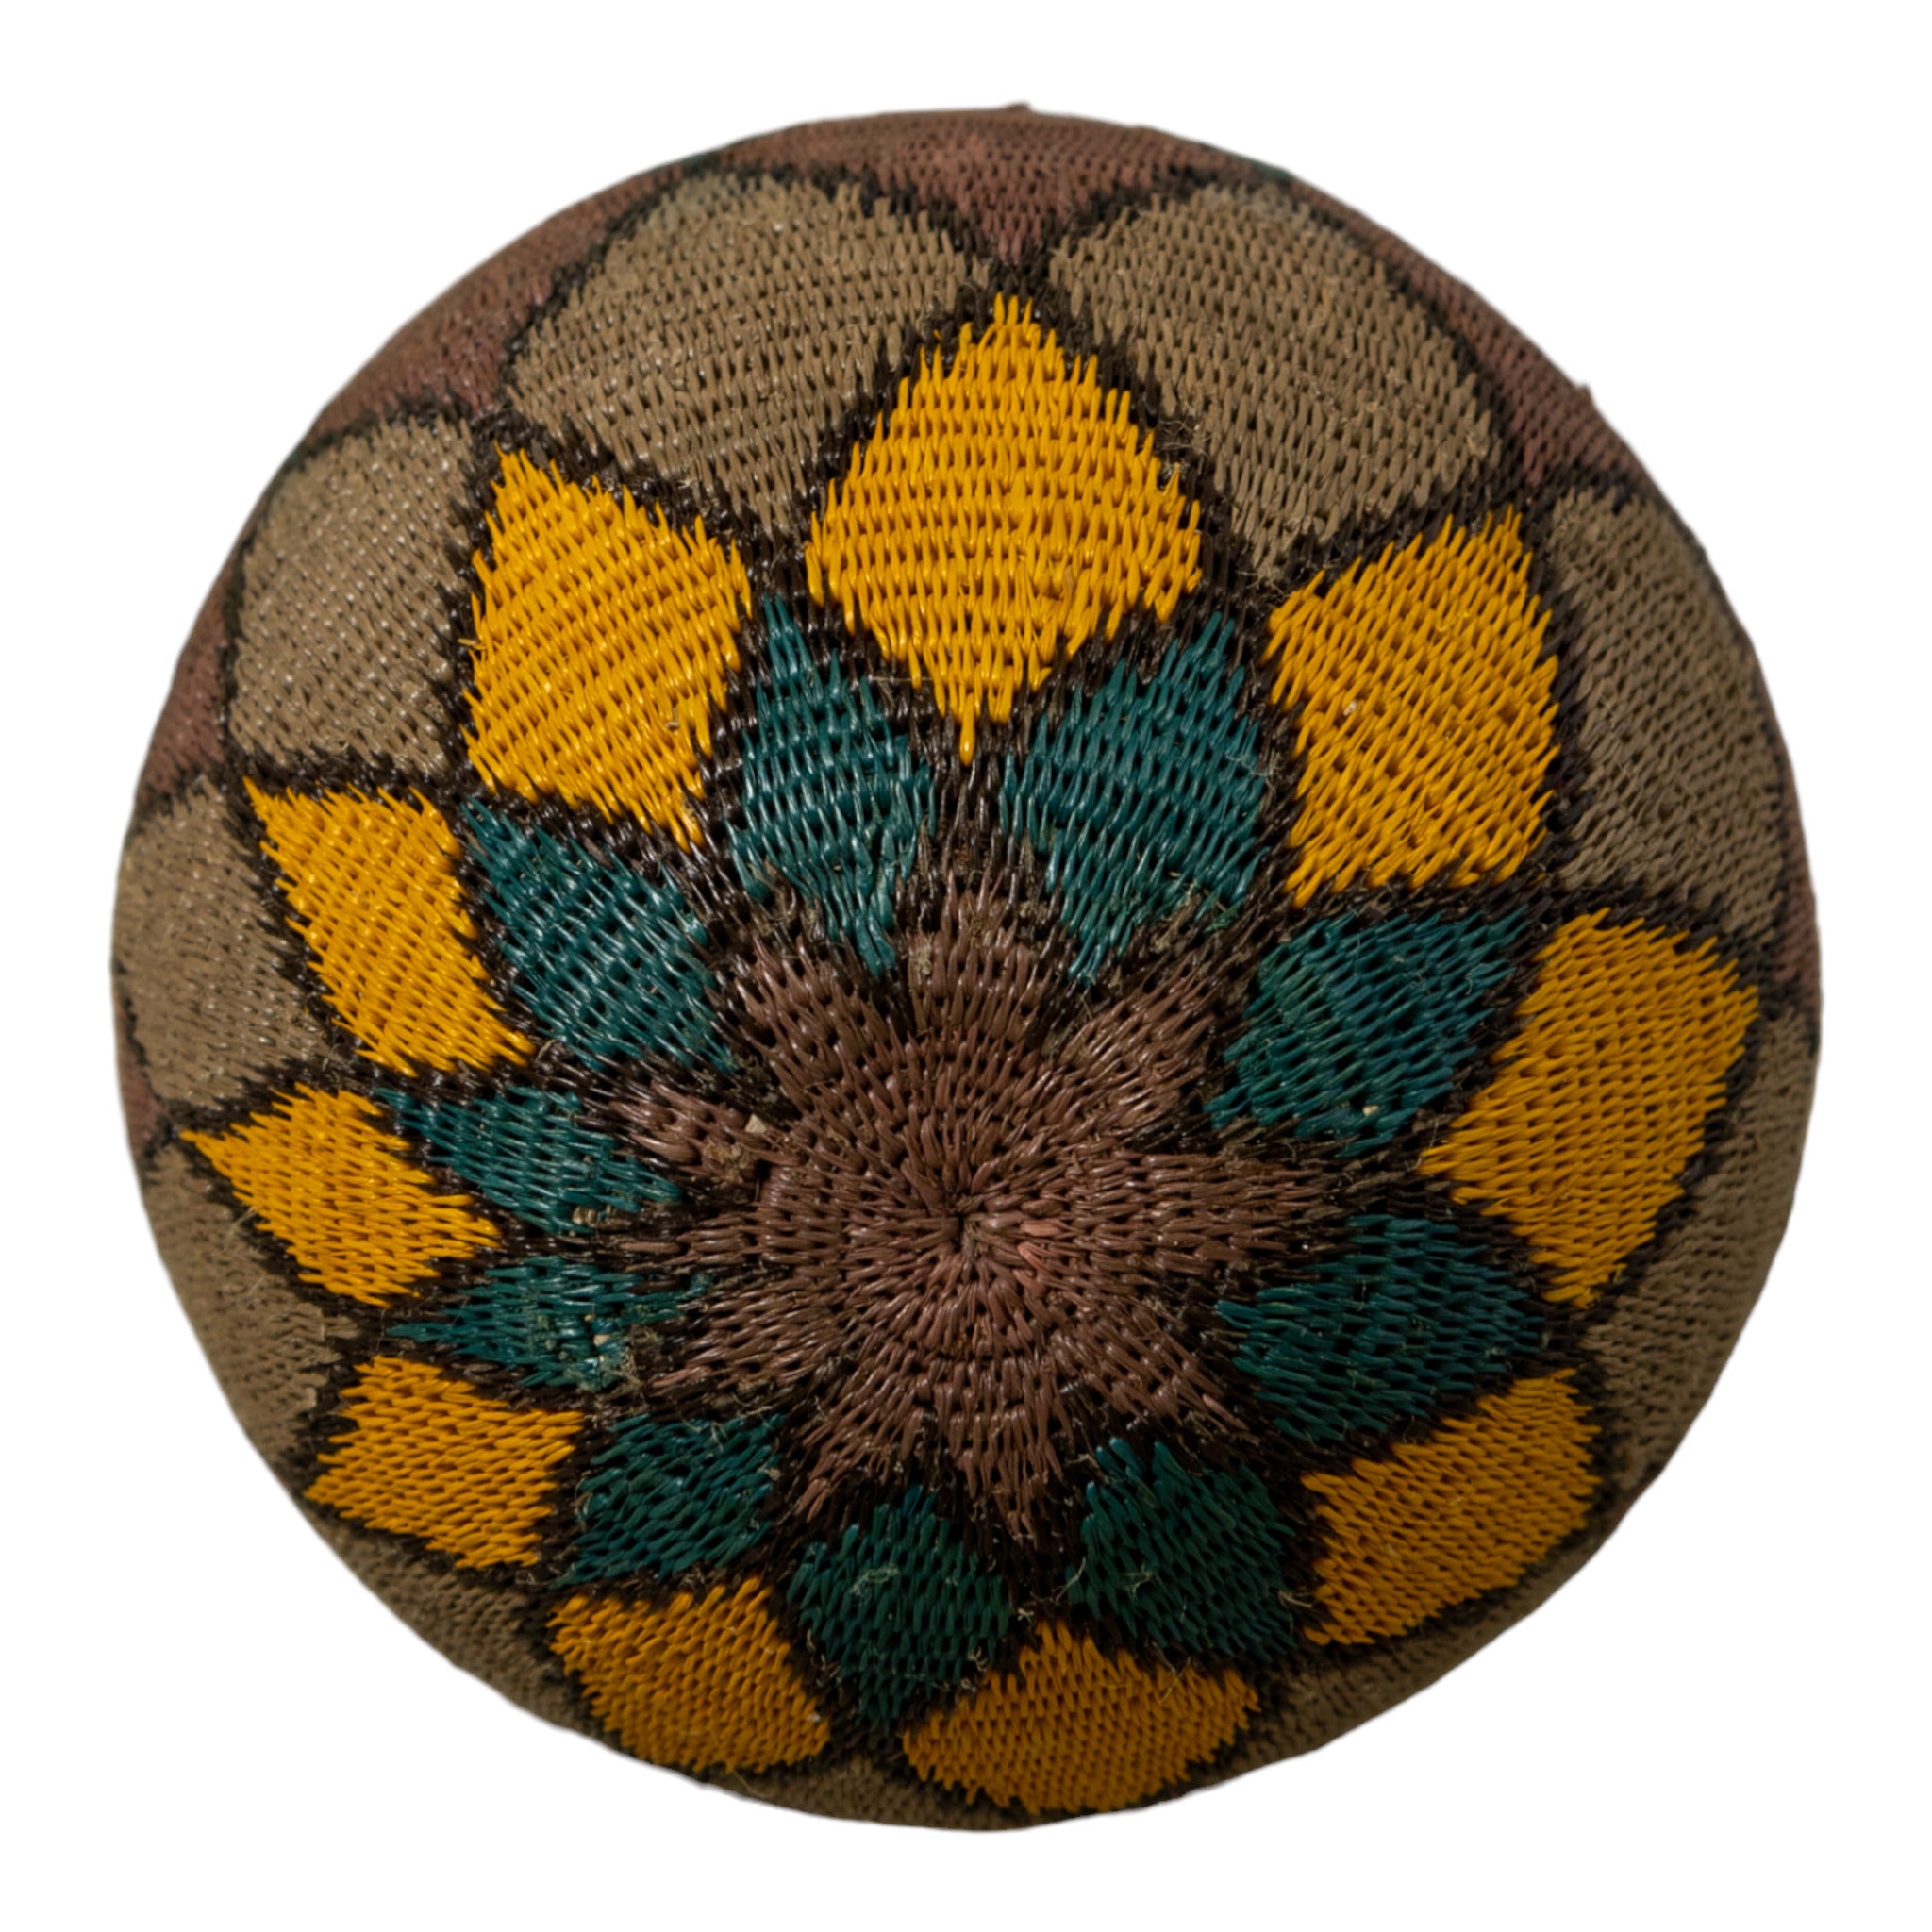 Green Gold and Brown Rainforest Basket